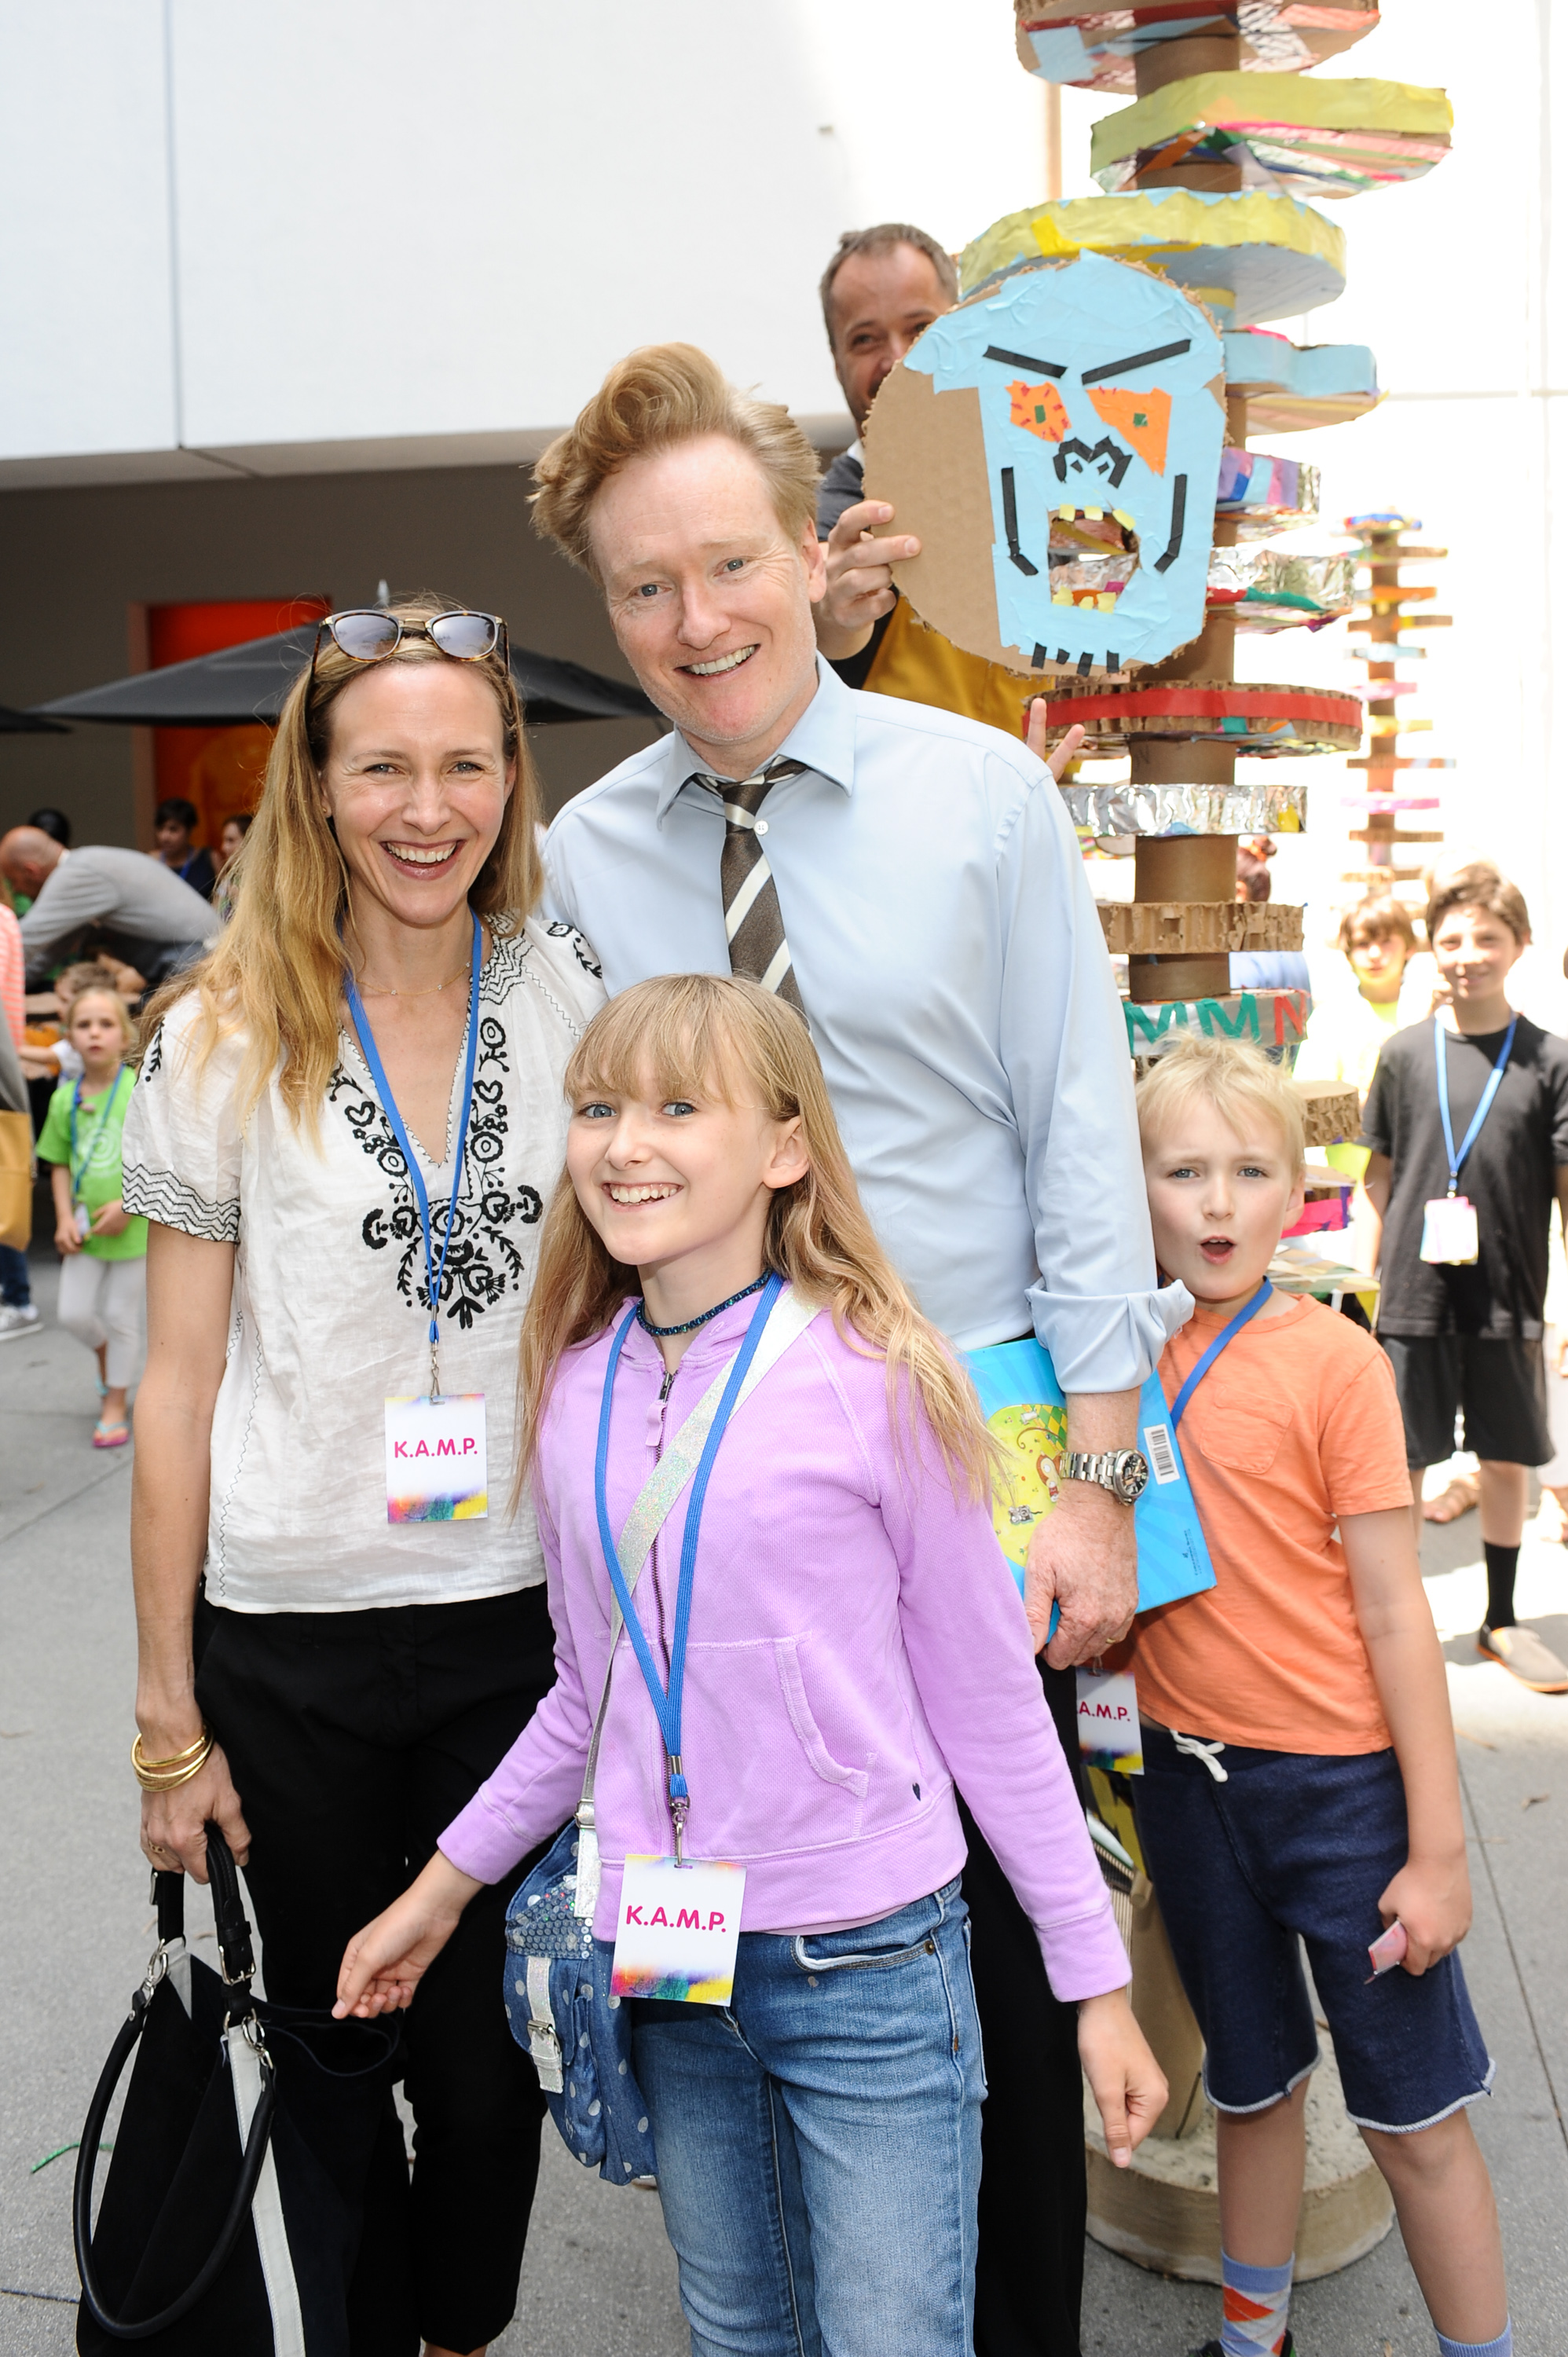 Liza Powel, Conan O'Brien, Neve  O'Brien, and Beckett  O'Brien at the Hammer Museum K.A.M.P. (Kids' Art Museum Project) 2014 on May 18, 2014, in Los Angeles | Source: Getty Images